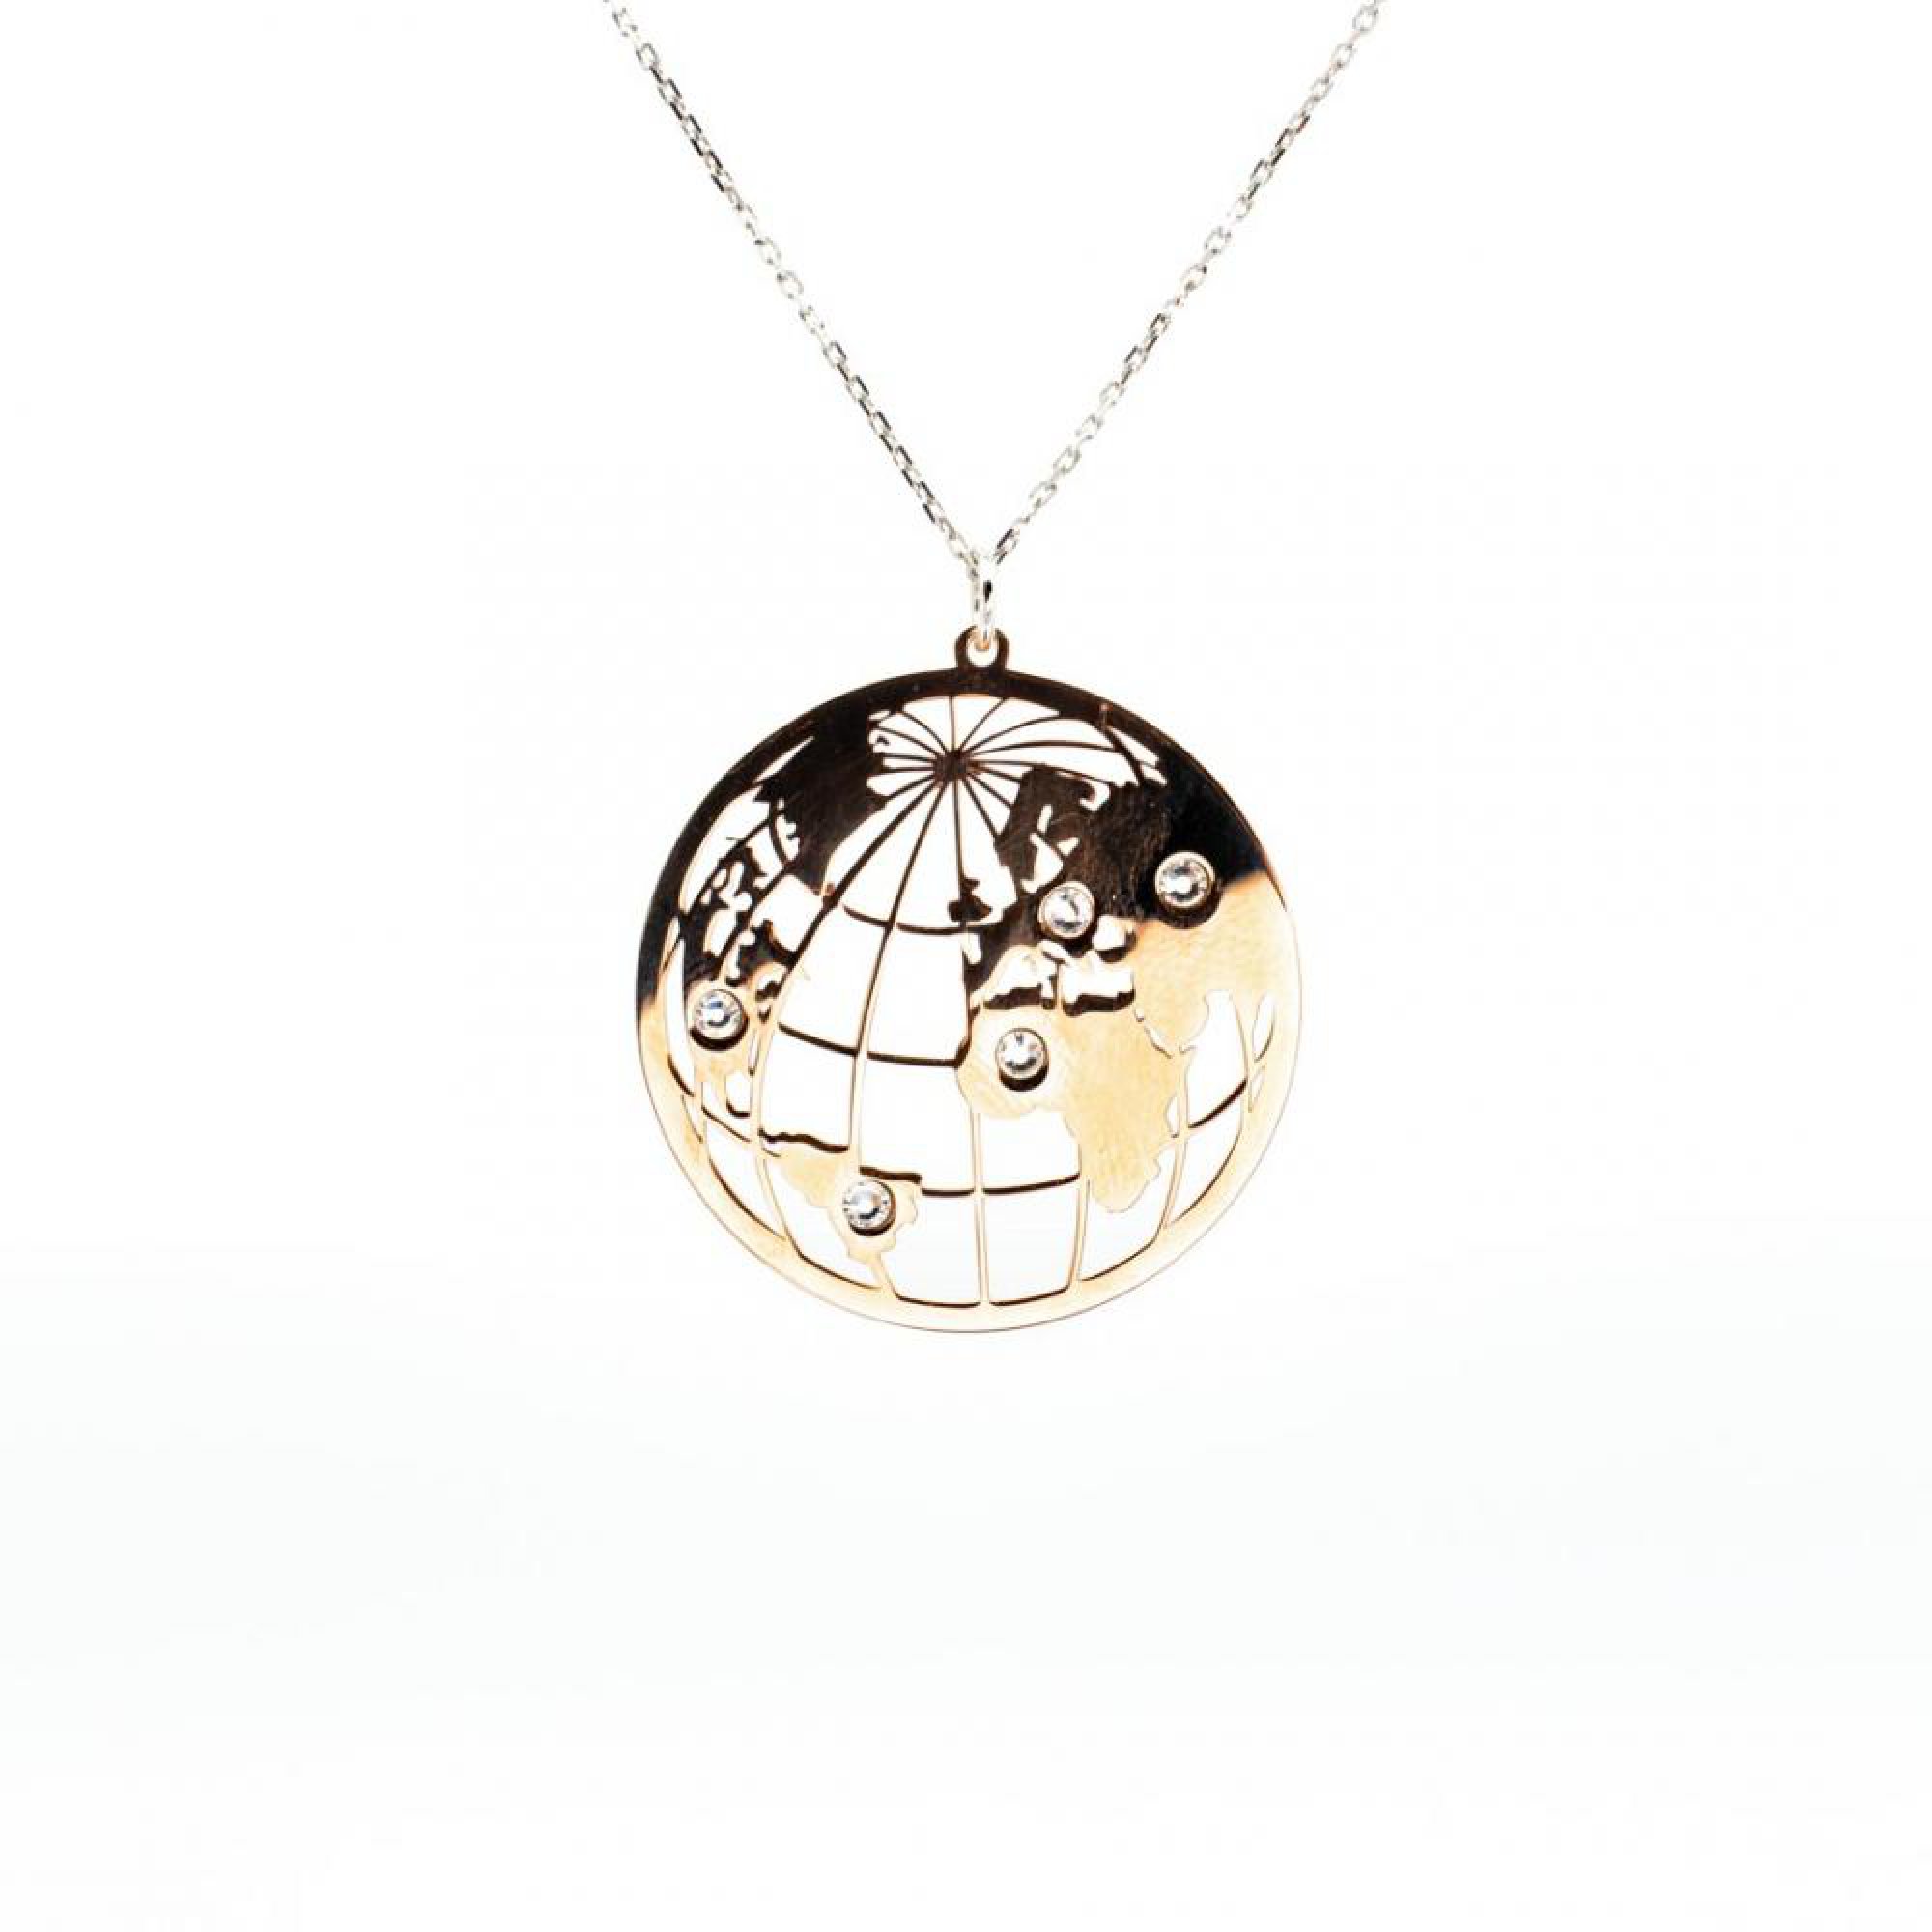 Silver globe necklace with zircon stones in rose gold